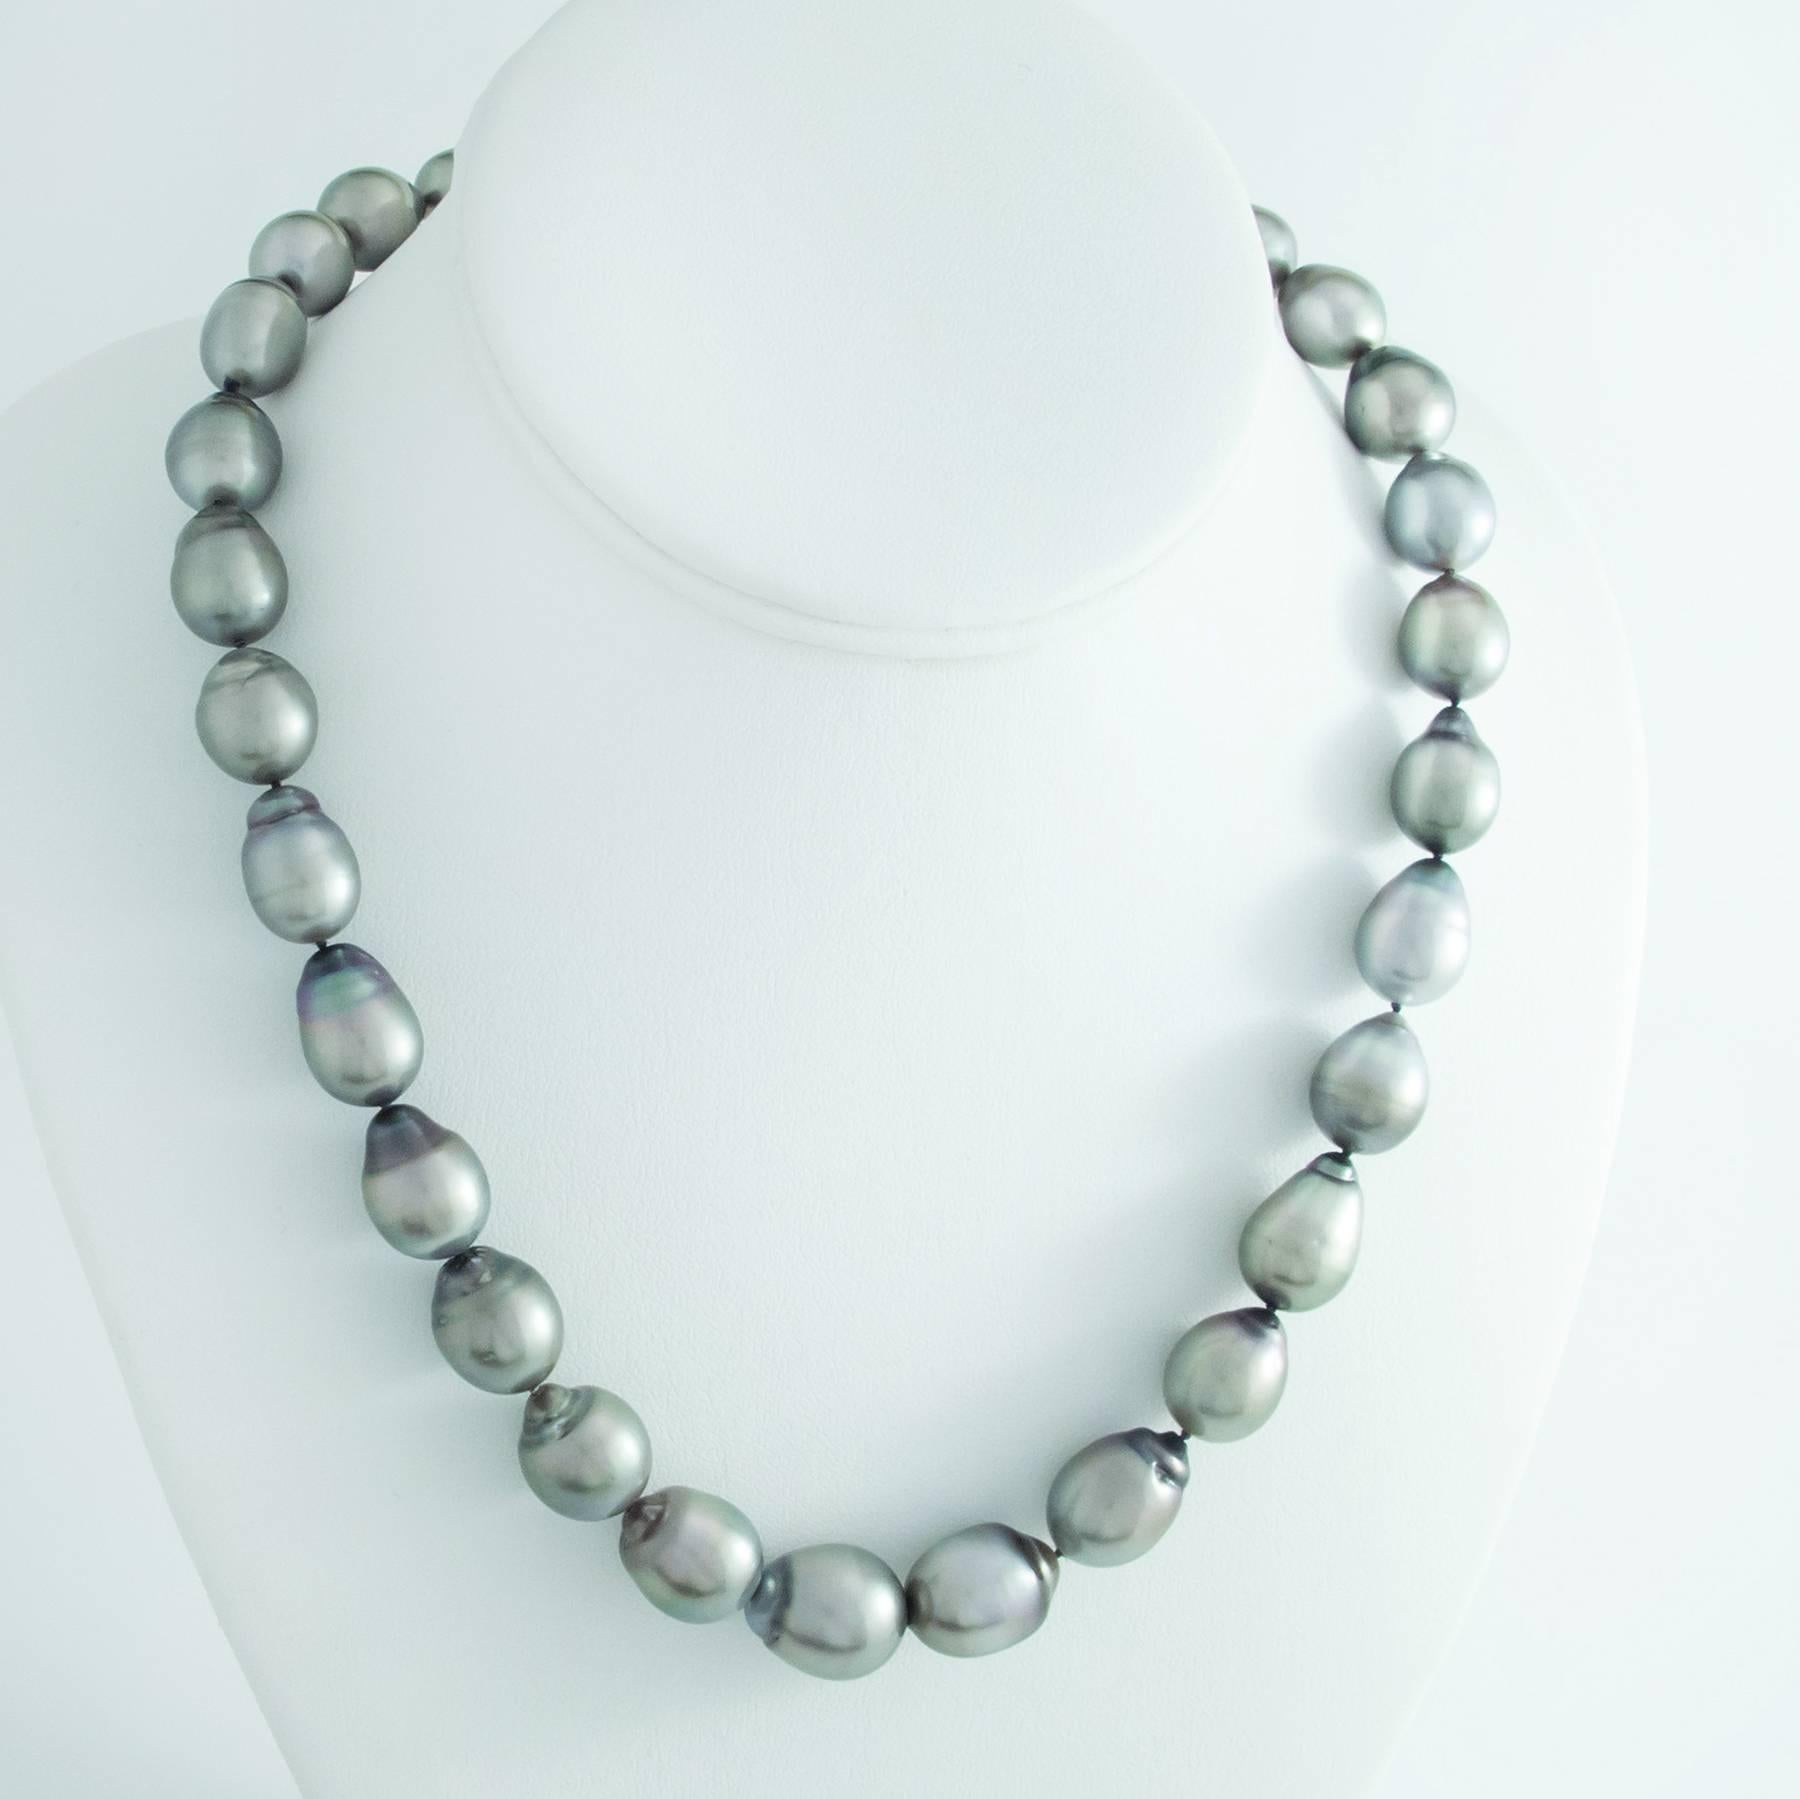 This lovely strand of oval shaped 10mm -14.5mm Tahitian Baroque Pearls measures 18 inches long and closes with a large 18K Gold clasp.

The Pearls are large and impressive. Slightly graduated with a thick nacre, and beautiful bright orient and